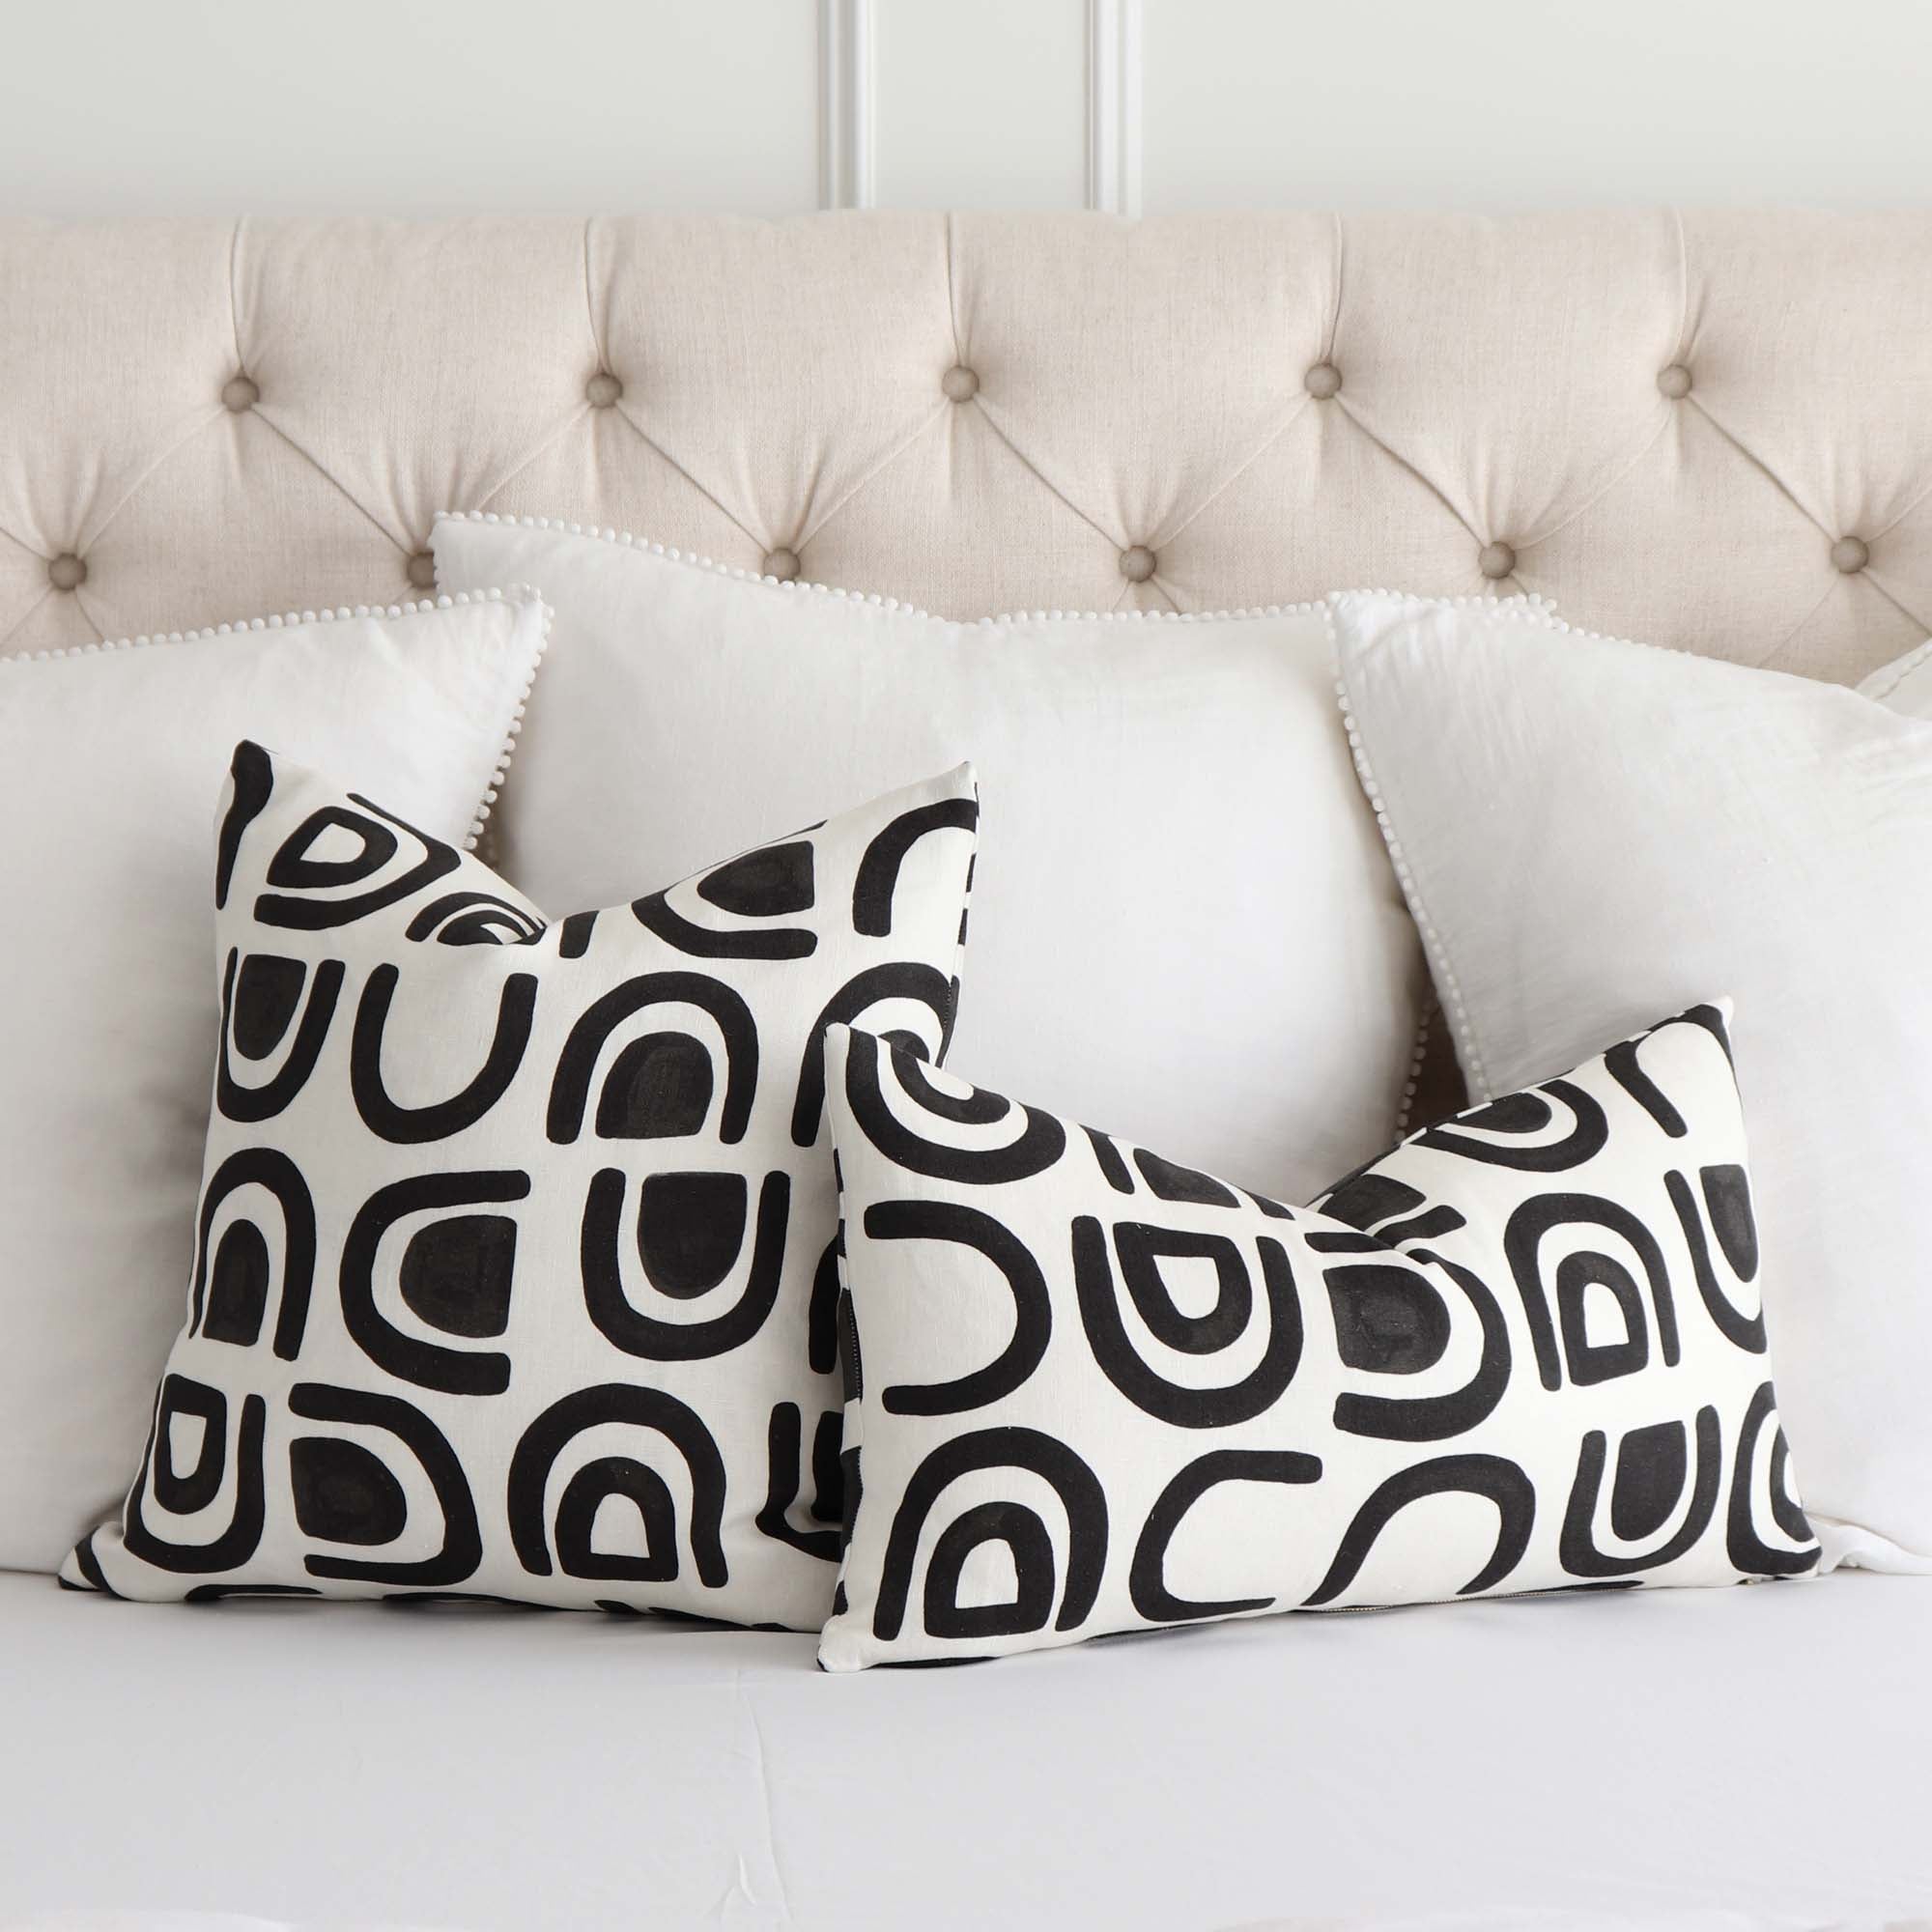 Schumacher Hidaya Williams Threshold Carbon Black Graphic Print Linen Decorative Throw Pillow Cover on King Bed with Big White Euro Shams